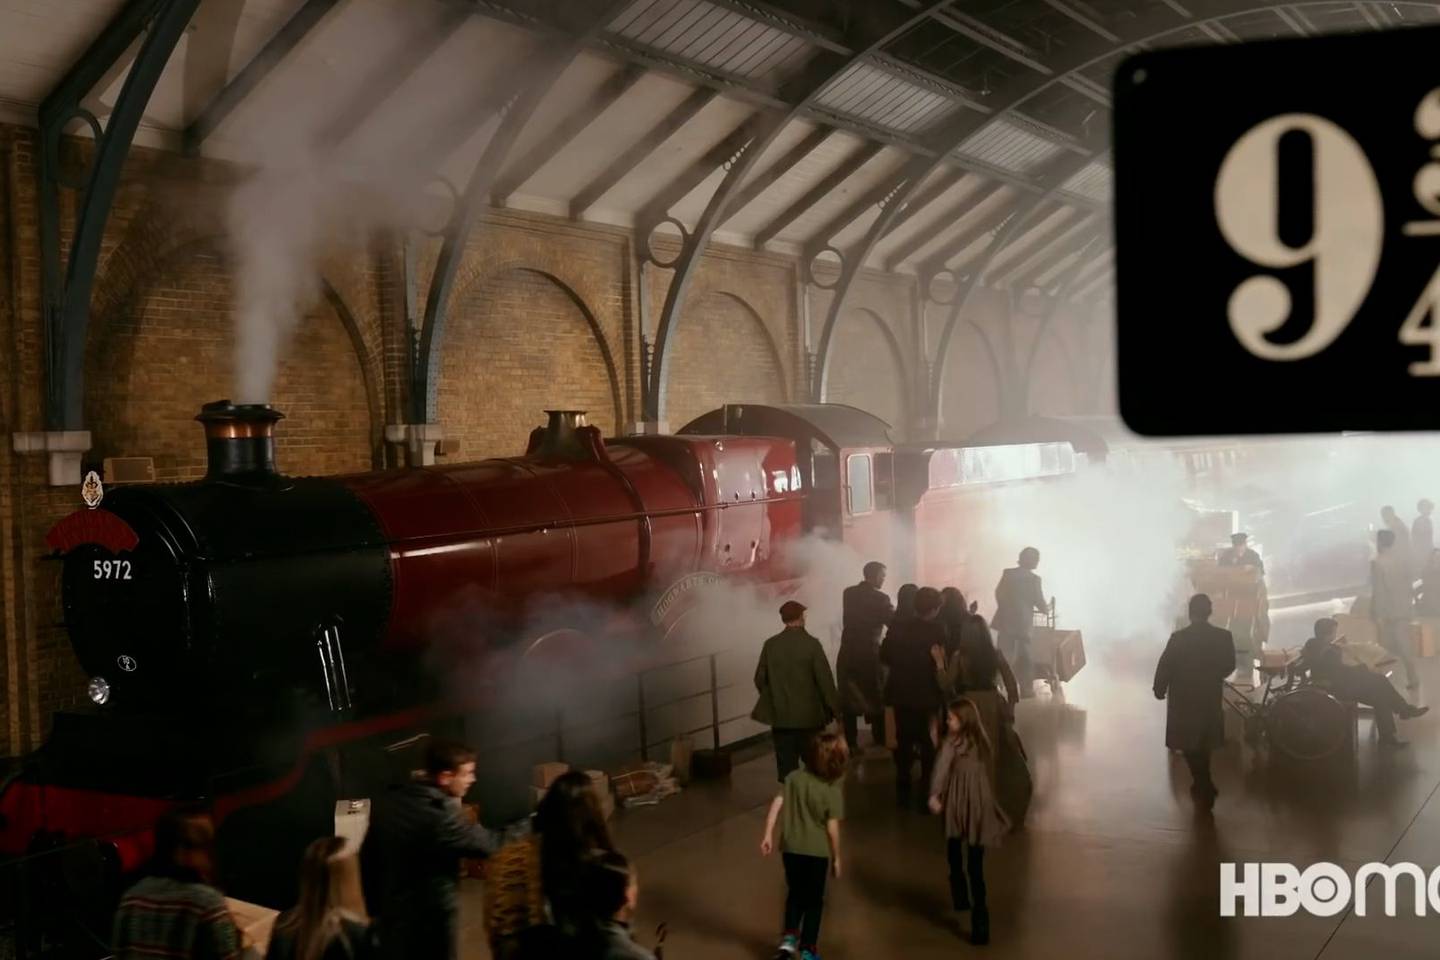 Watch the trailer for Harry Potter 20th Anniversary: Return to